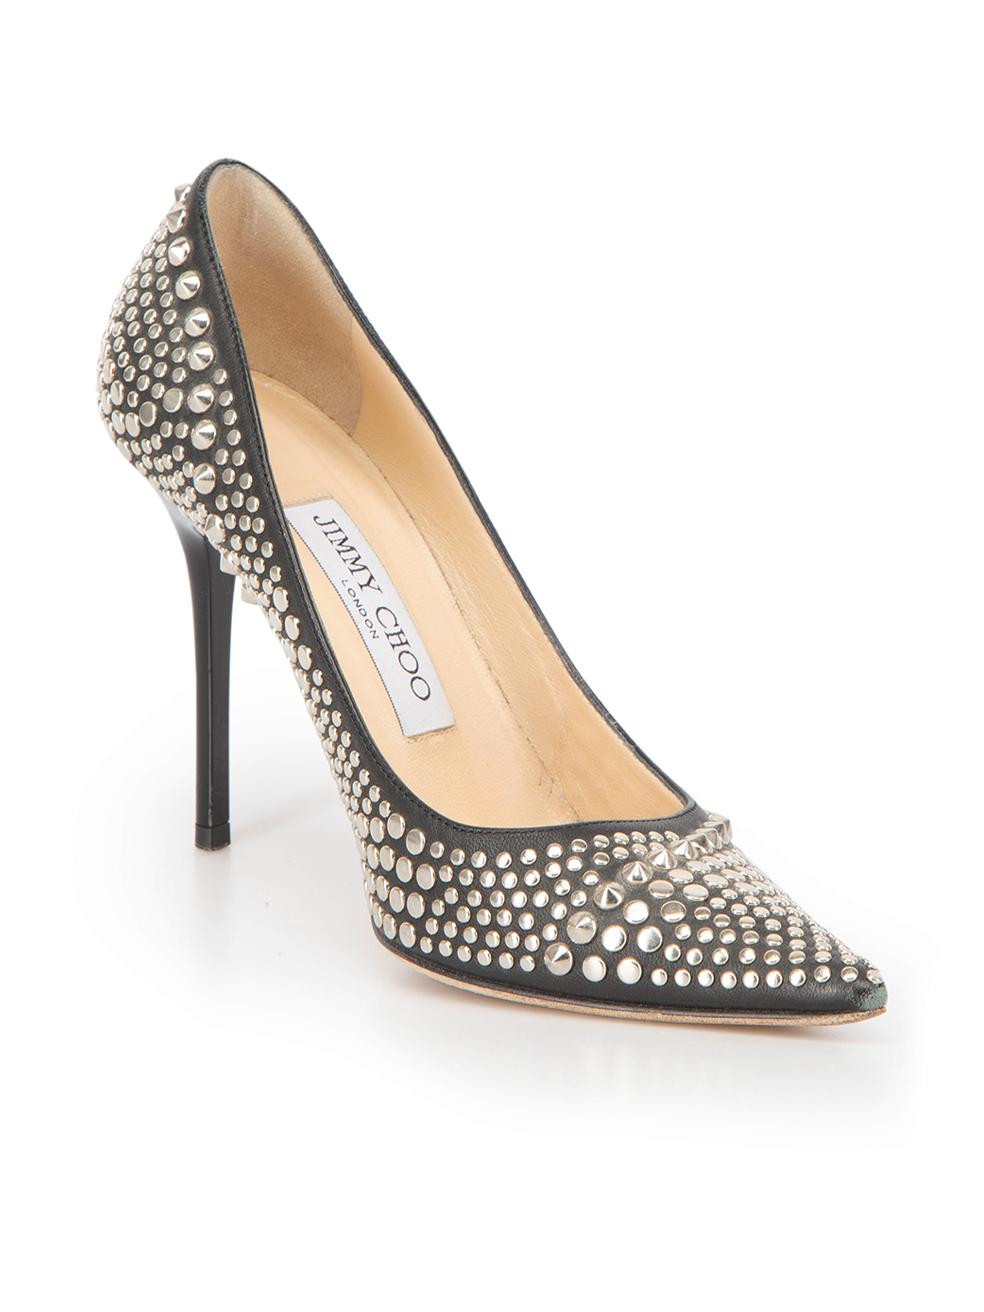 CONDITION is Very good. Minimal wear to heels is evident. Minimal wear to the silver studs and the outsole on this used Jimmy Choo designer resale item.



Details


Black

Leather

High heels

Point-toe

Silver tone studs

Slip